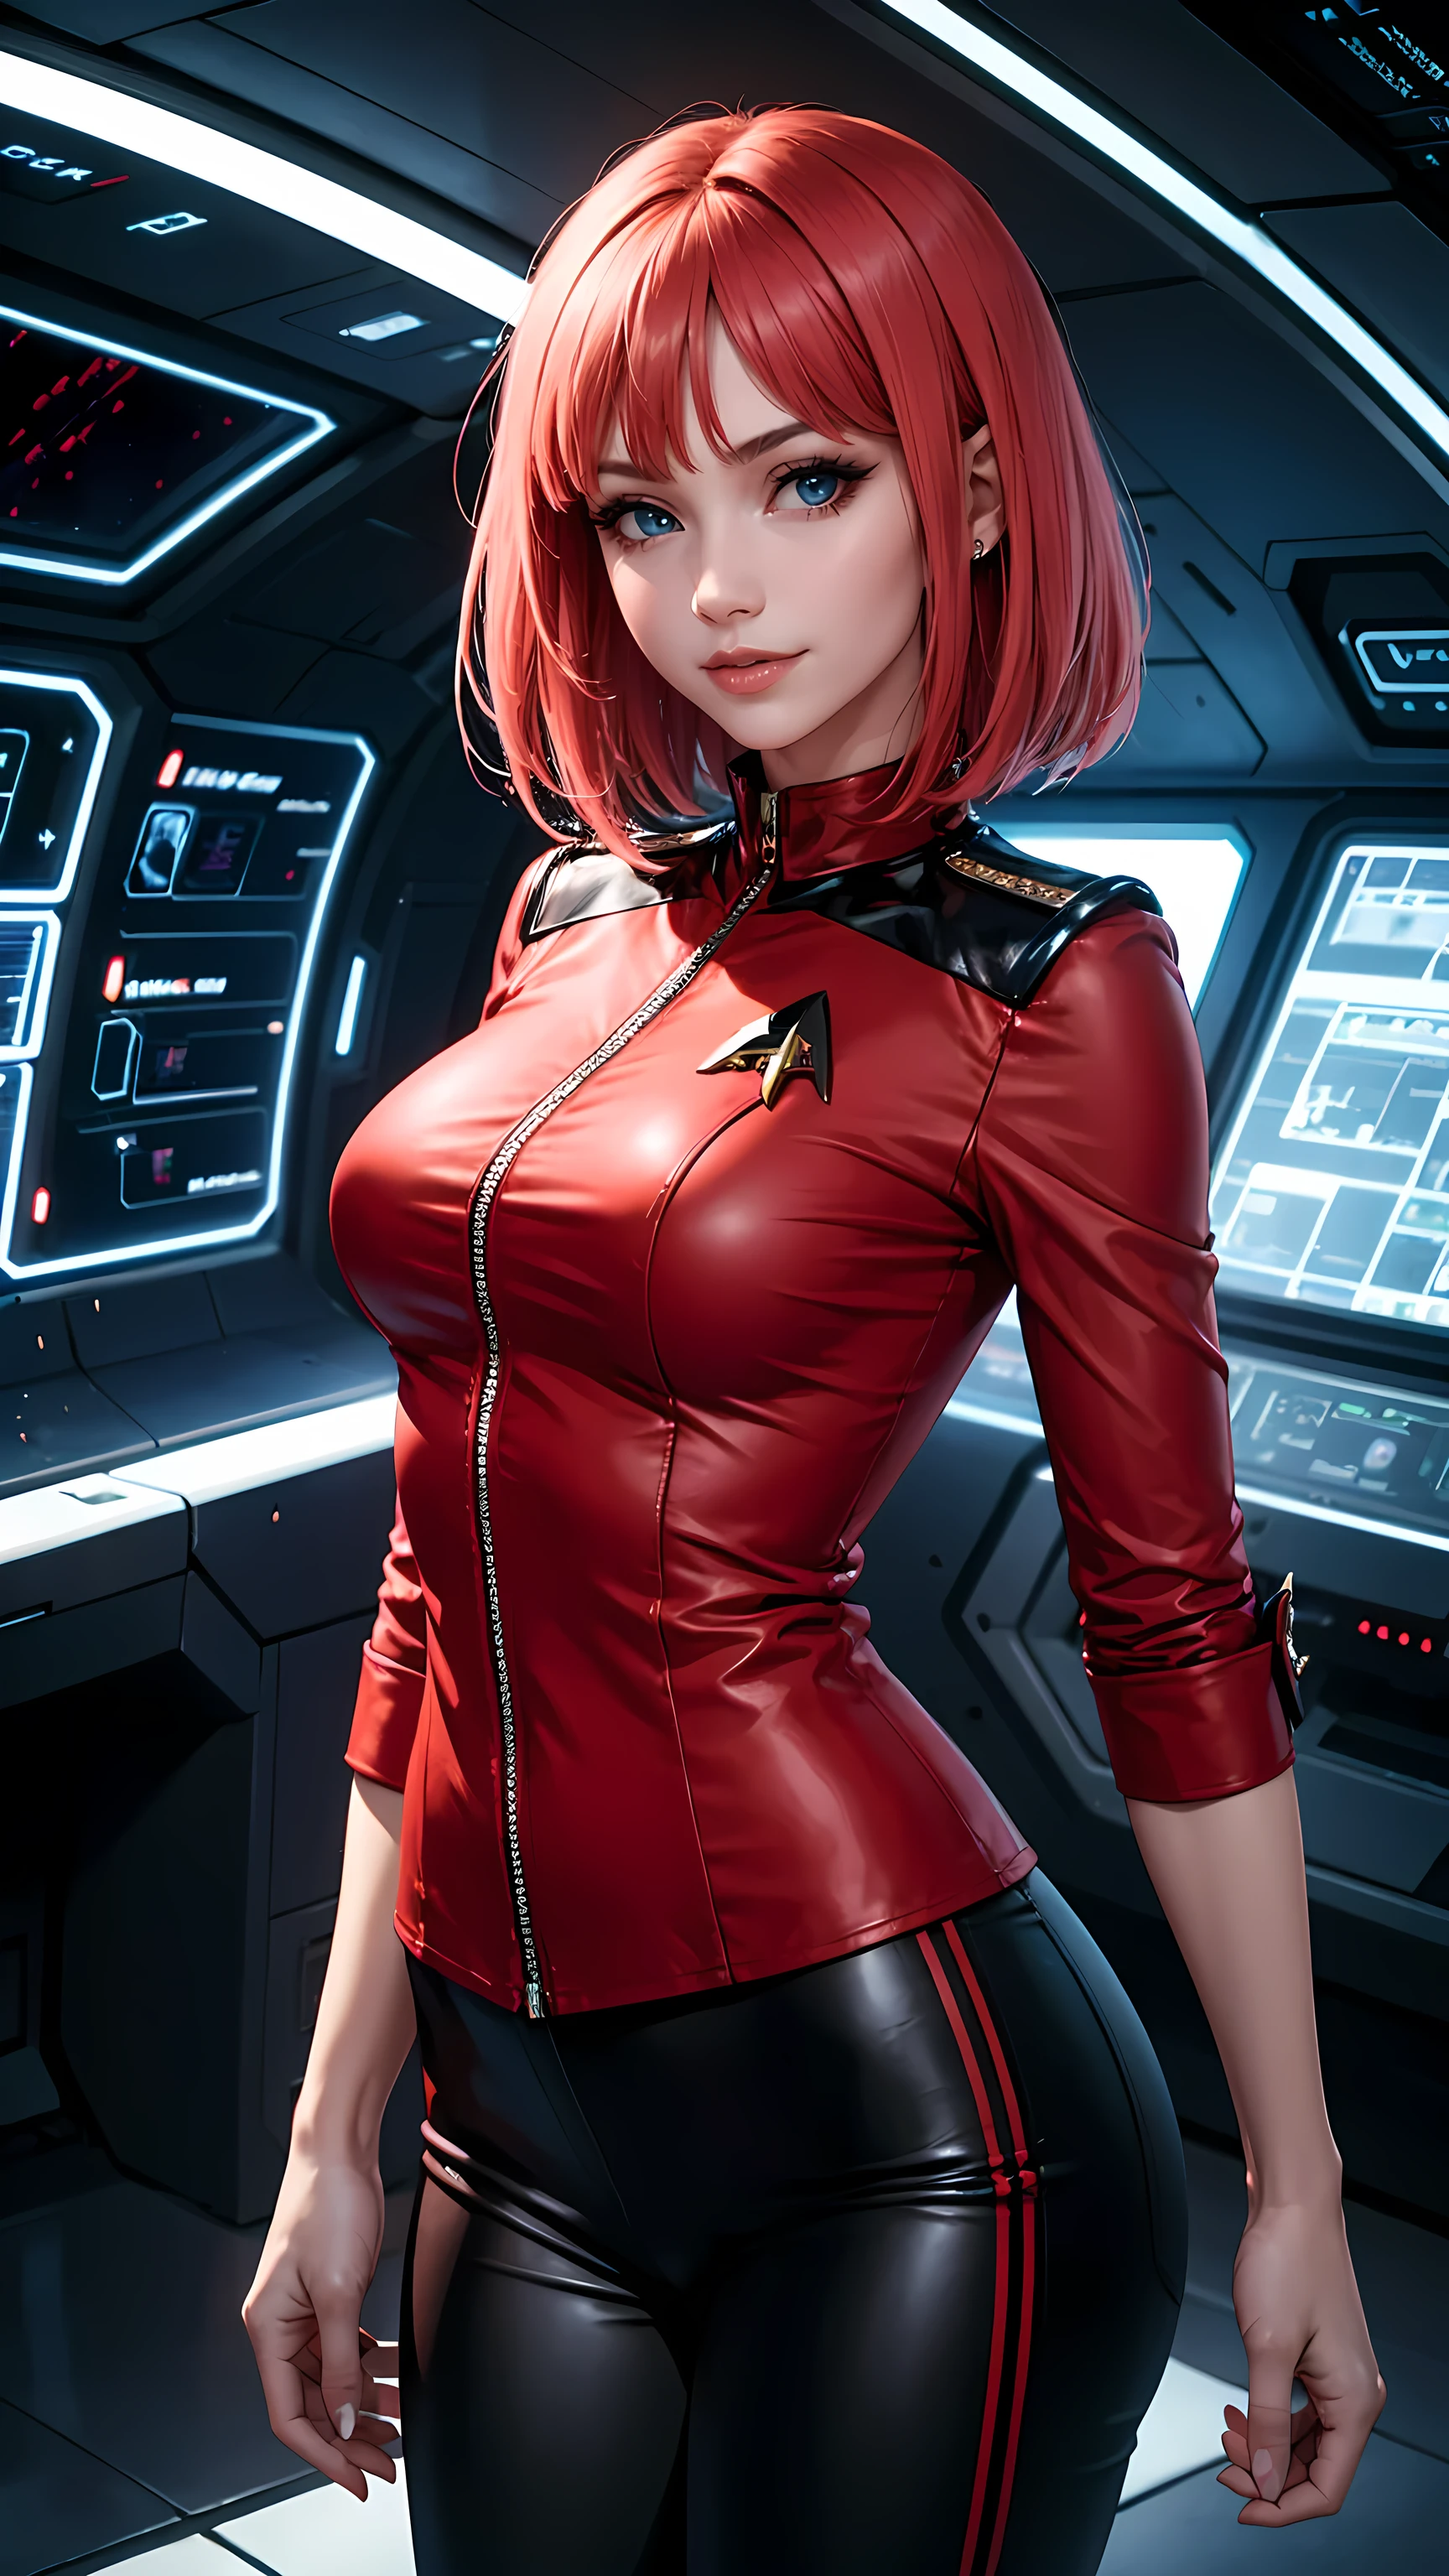 Beautiful short hair woman is shown to have a sexy figure, She is wearing classic star trek all red uniform, red shirt, black pants, jewelry, she has blue eyes, smile tease look, Girl standing on a command bridge of a starship, poseing, portrait, superior quality, many details, realistic